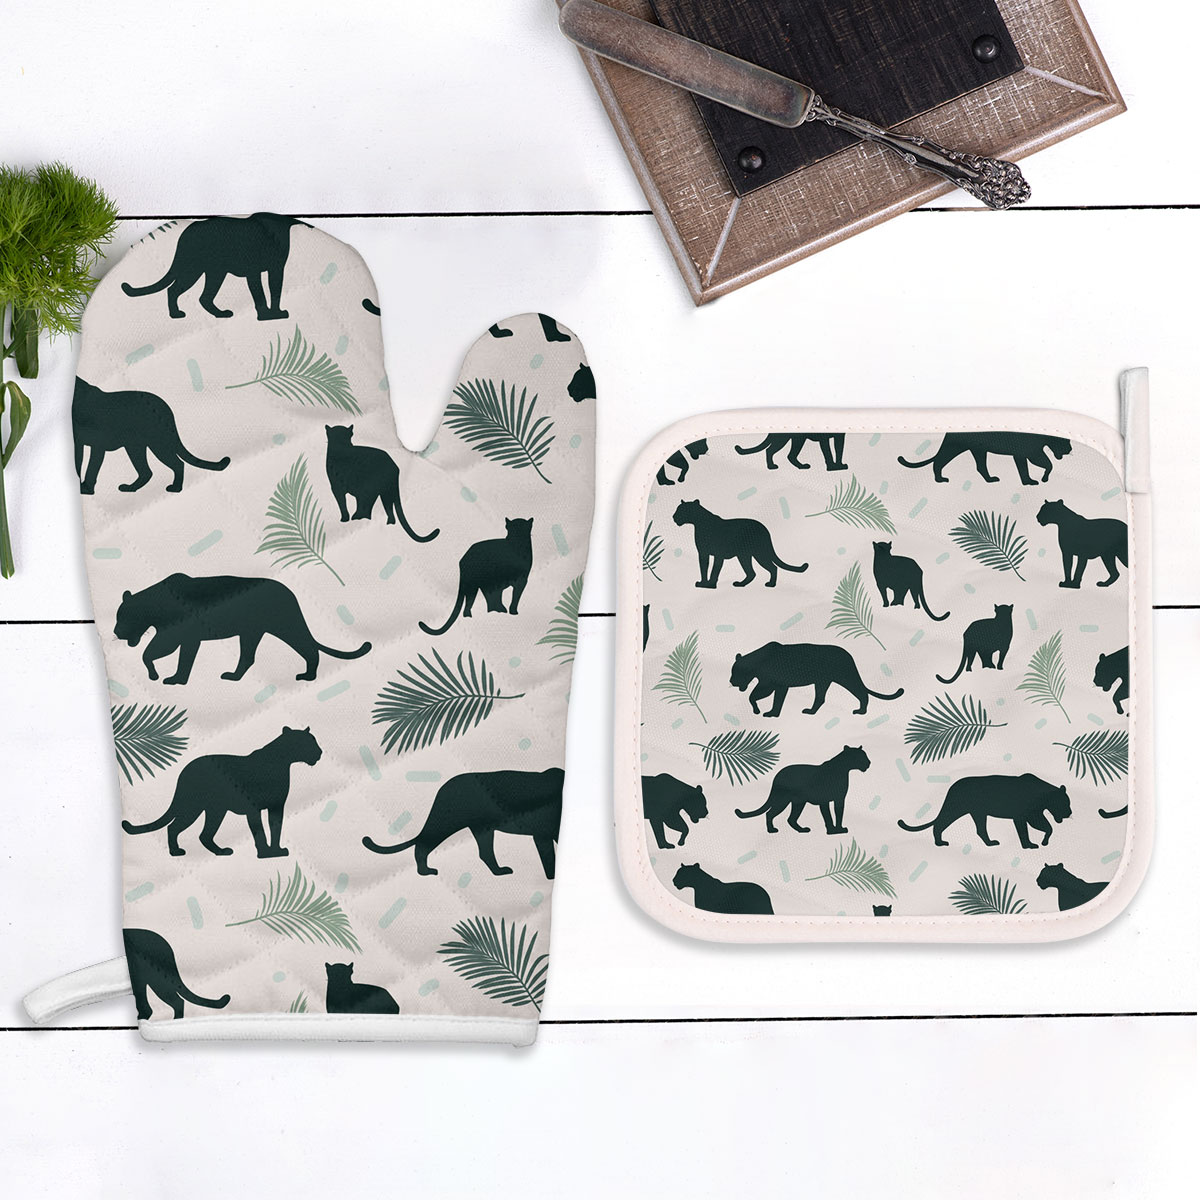 Green Panther Oven Mitts Pot Holder Set